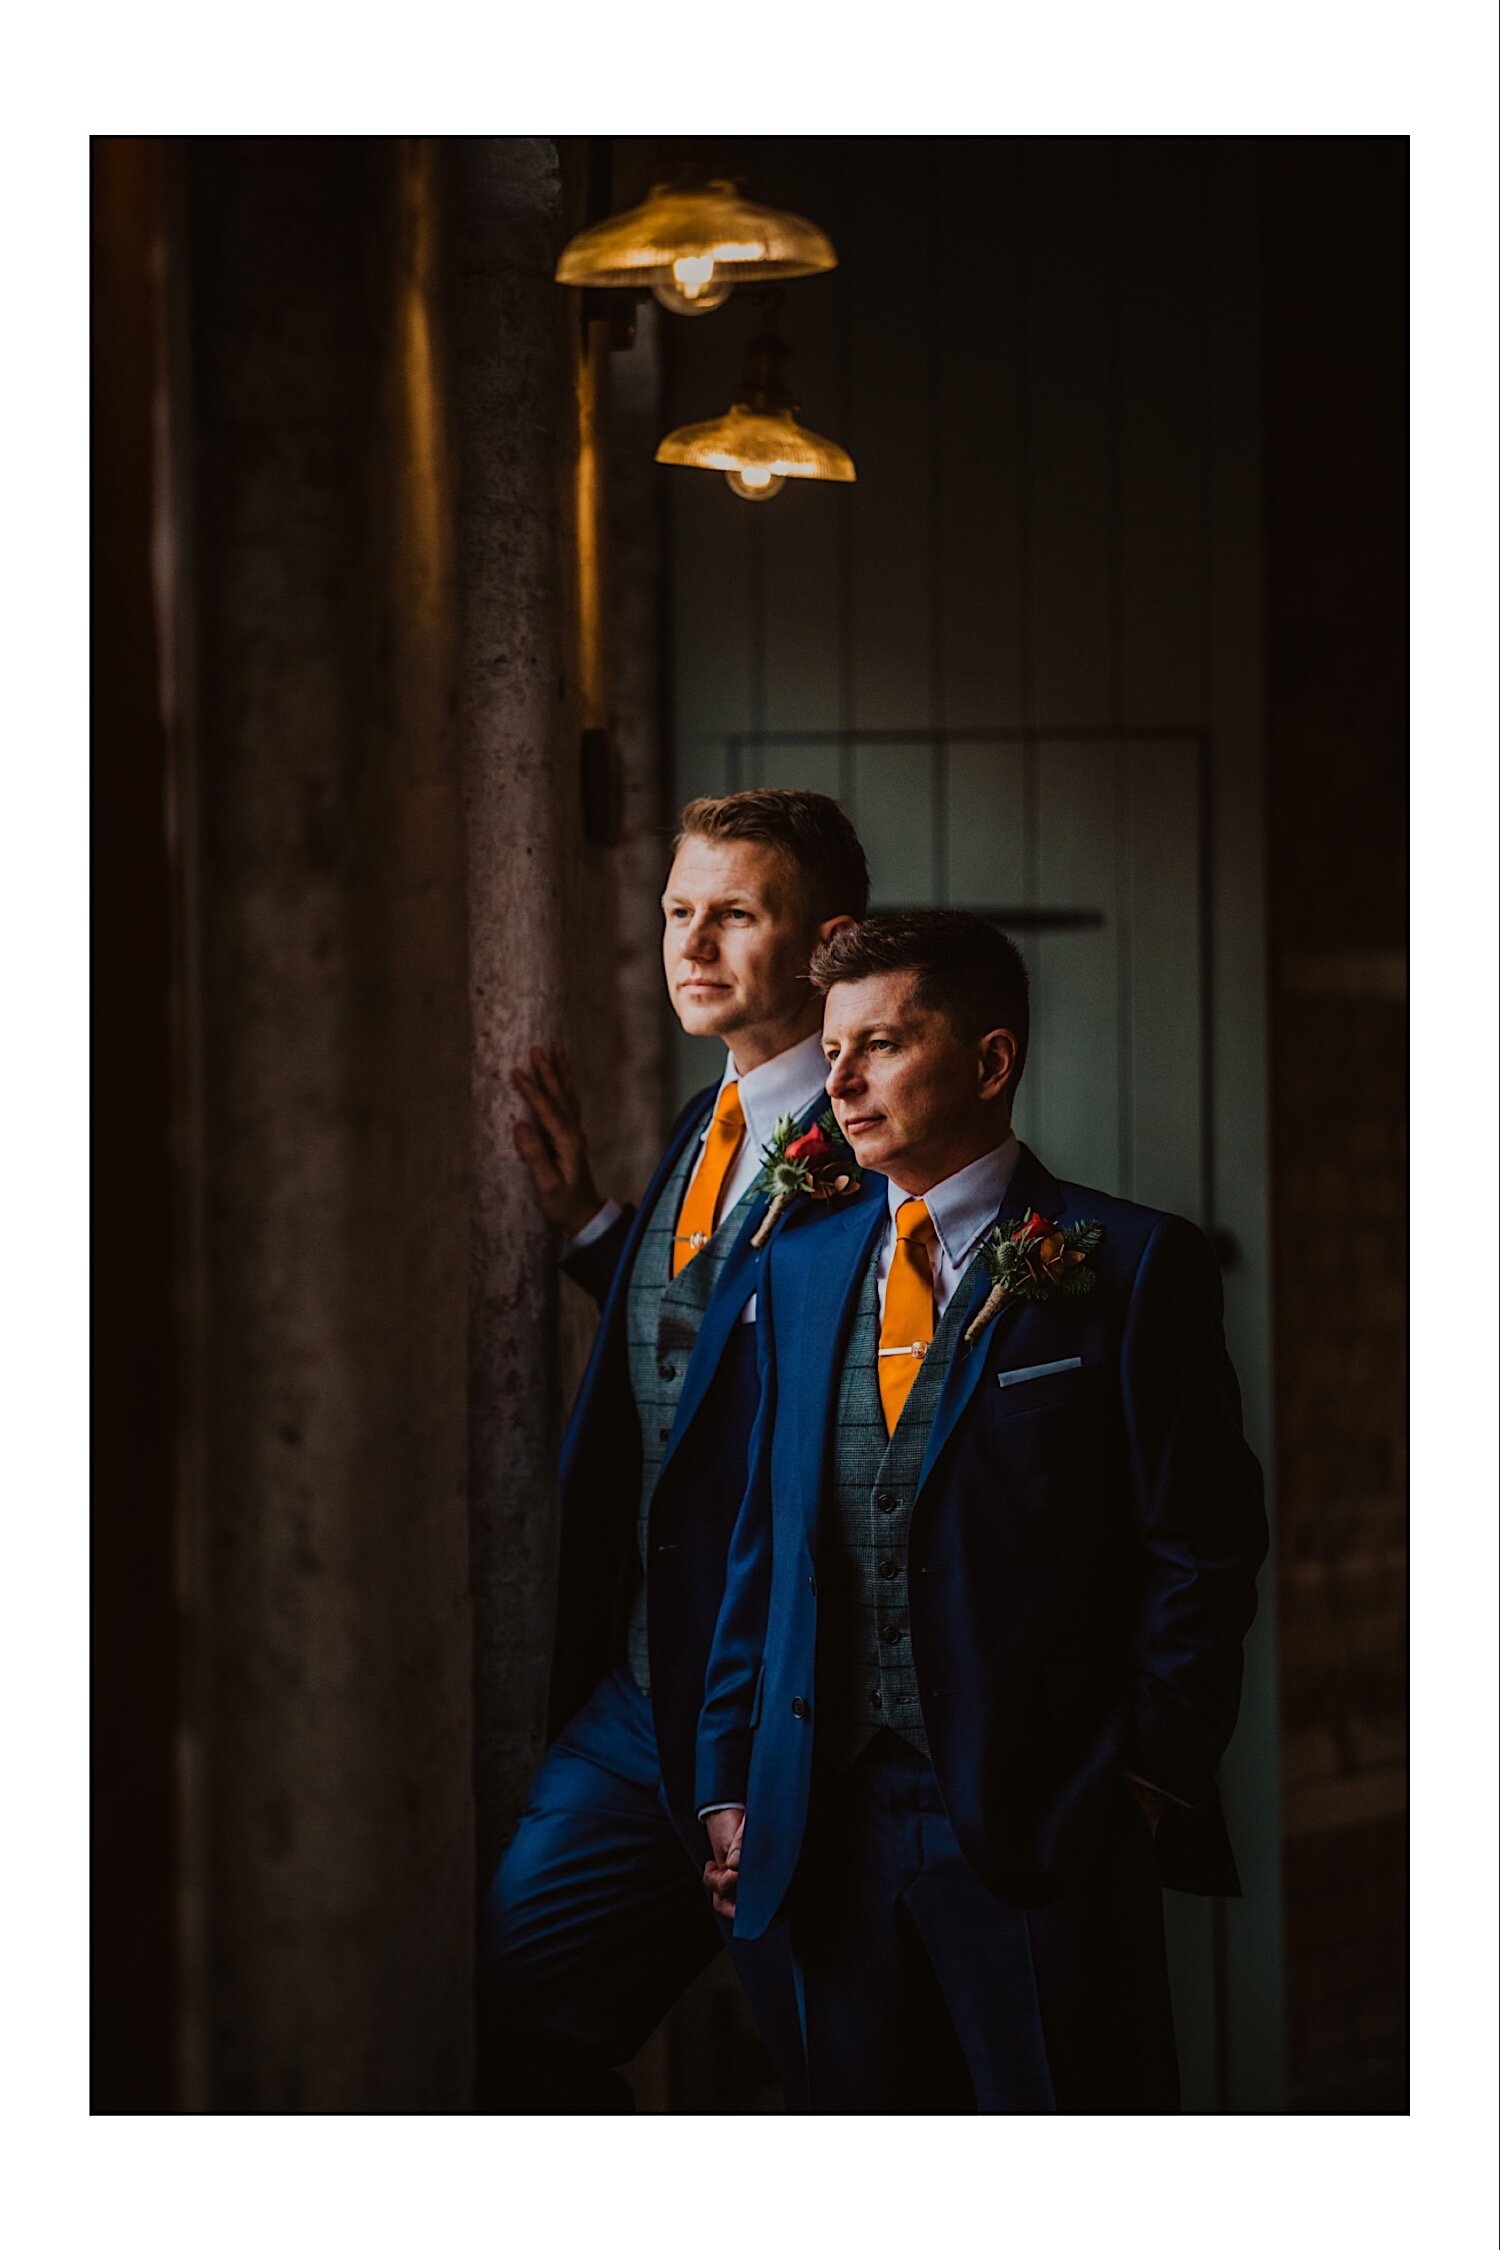 28_TWS-197_photographer_wedding_industrial_grooms_gay_same_photography_venue_chic_westmill_sex_derby.jpg